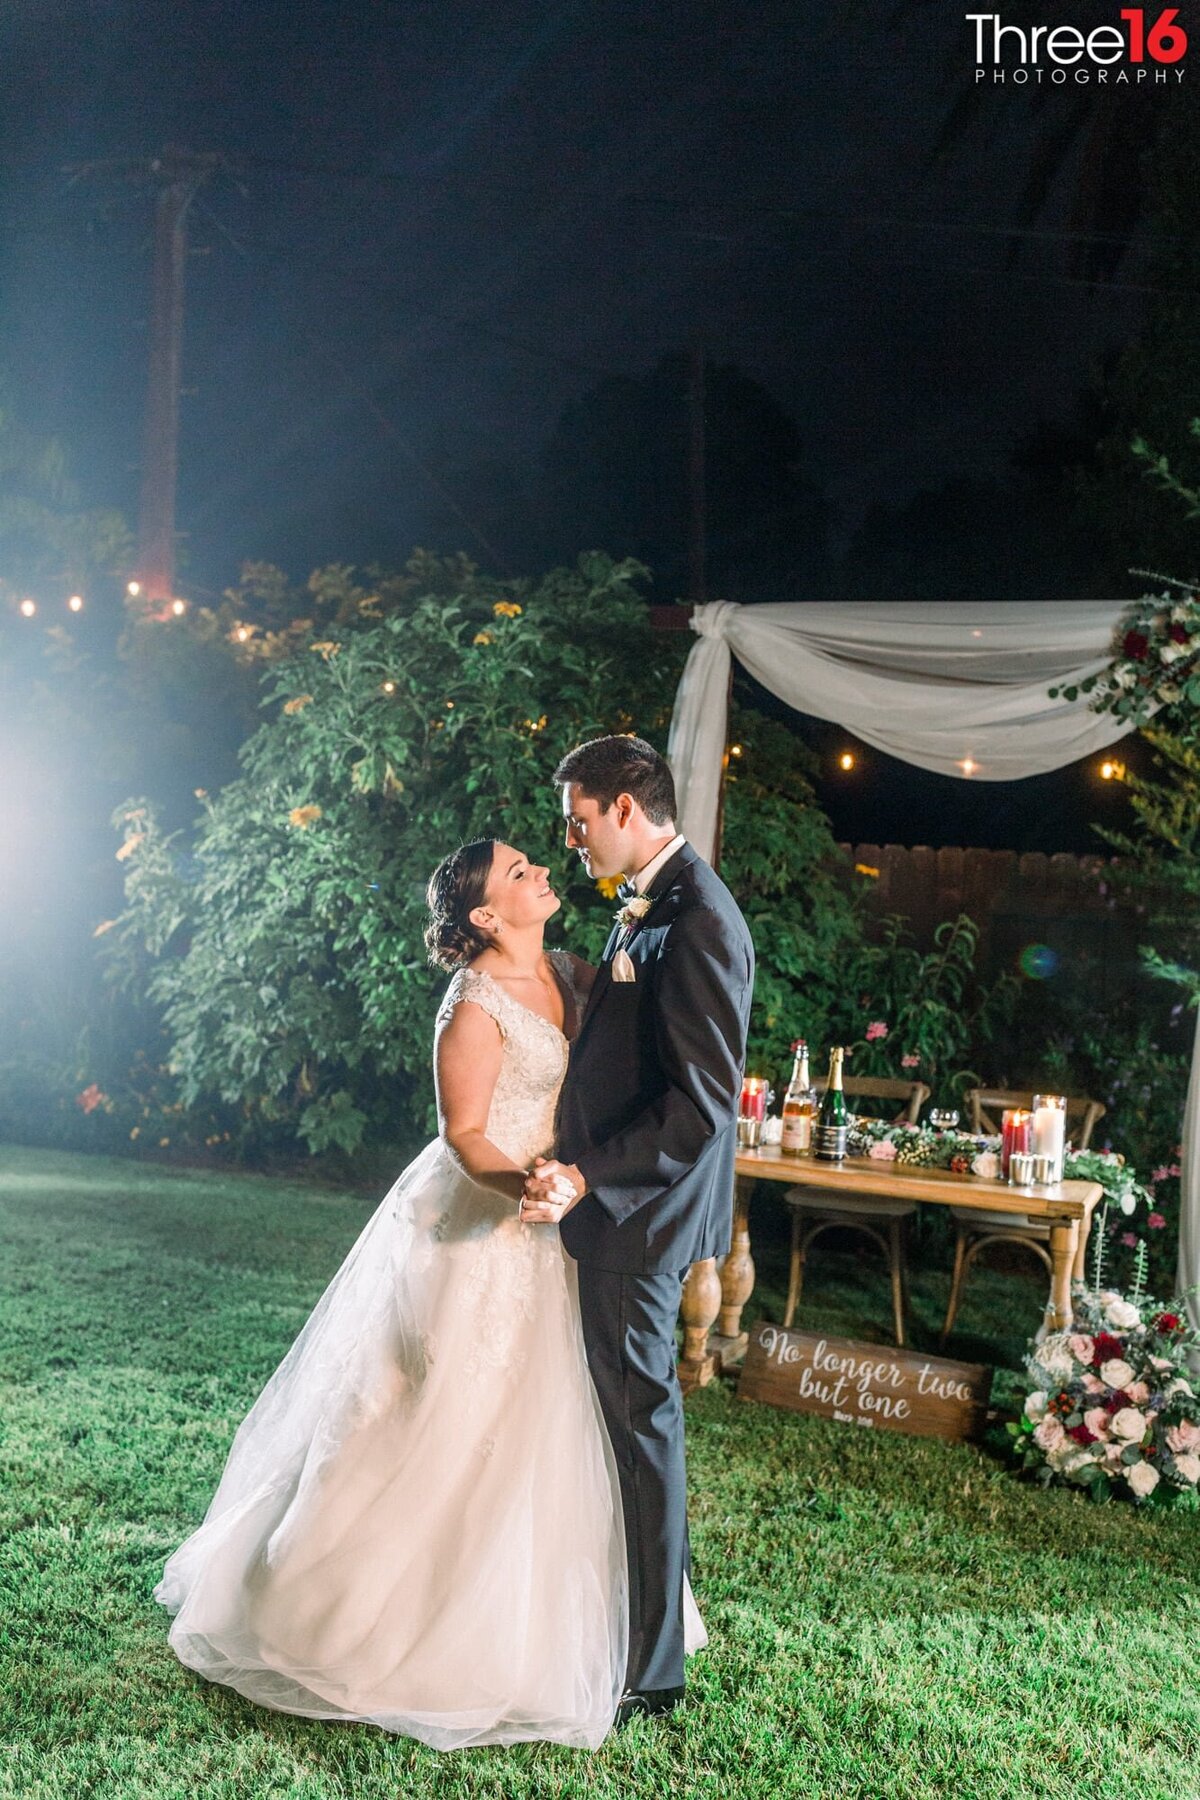 Bride and Groom share a dance in a rustic ceremony setup